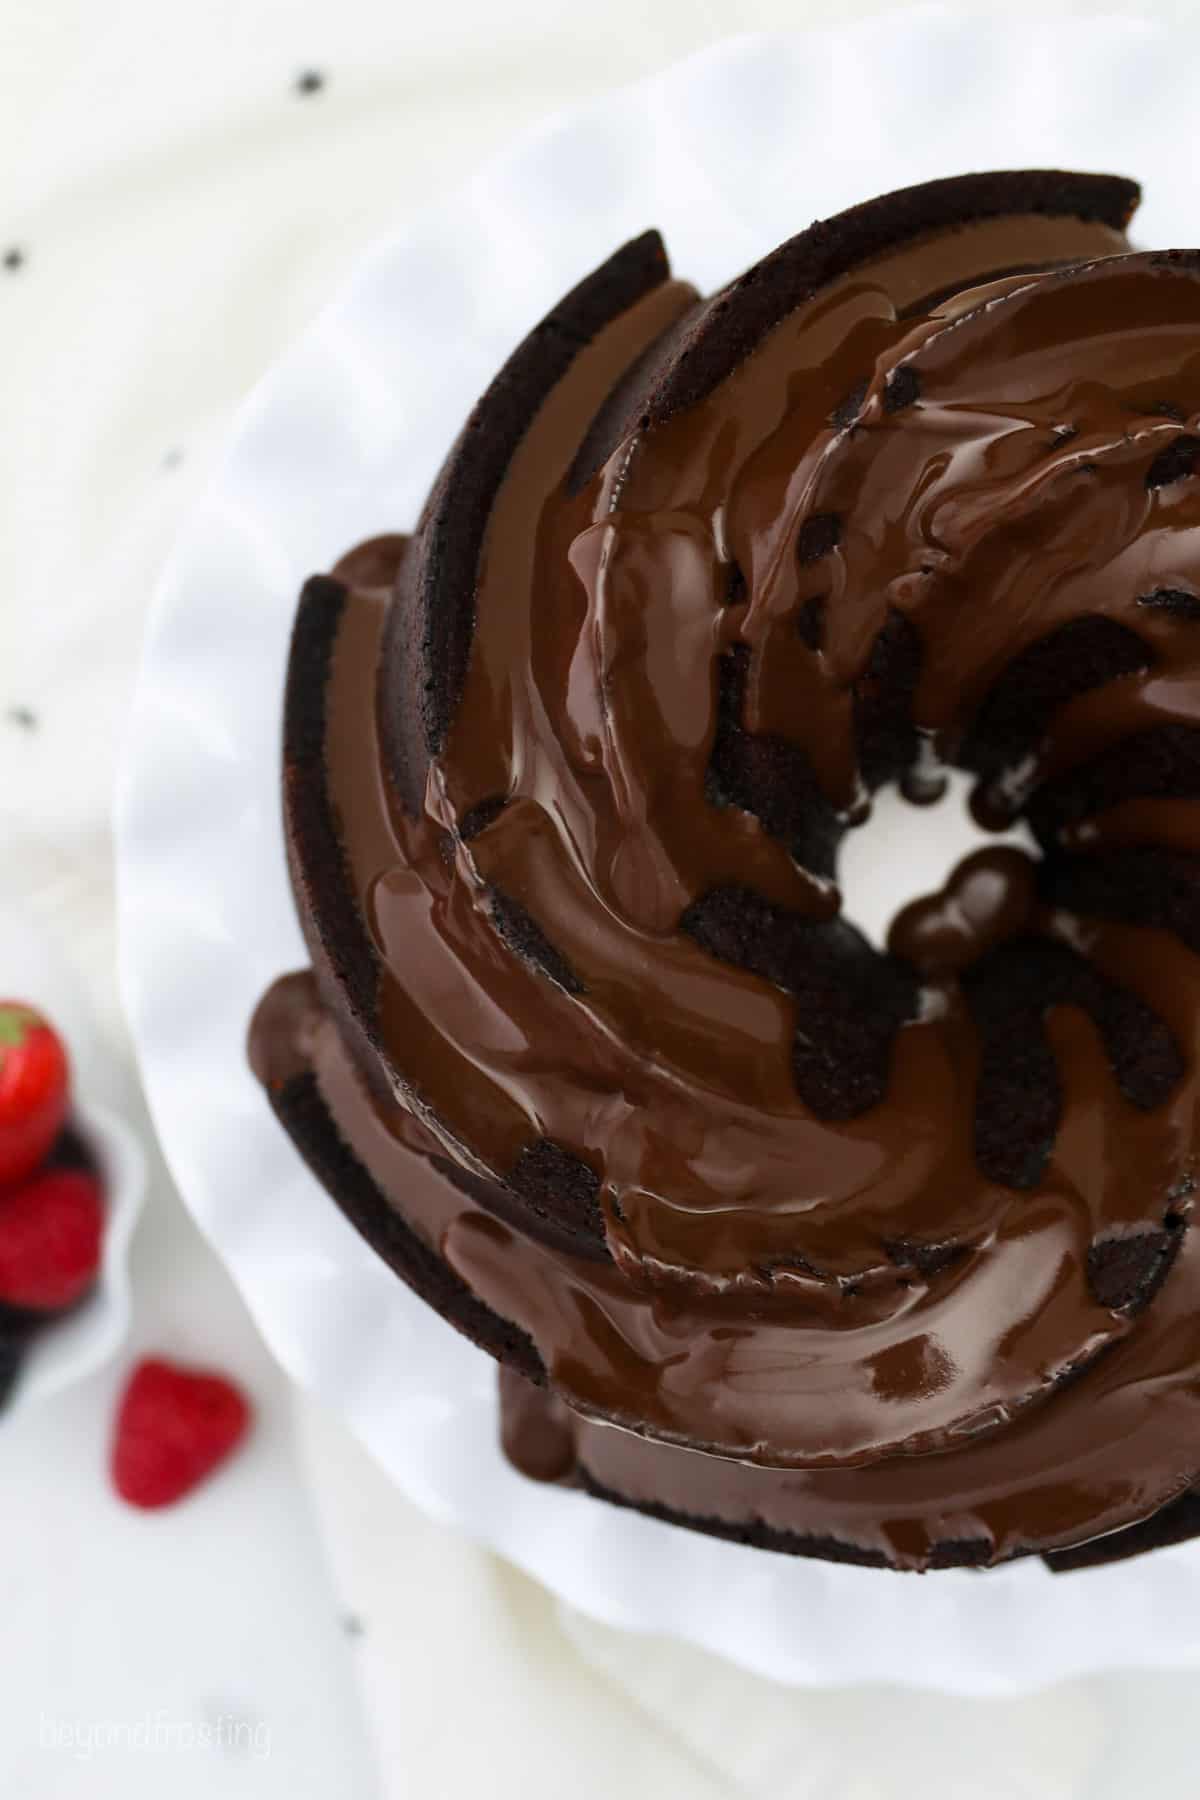 Overhead view of a chocolate bundt cake topped with chocolate ganache on a cake stand.